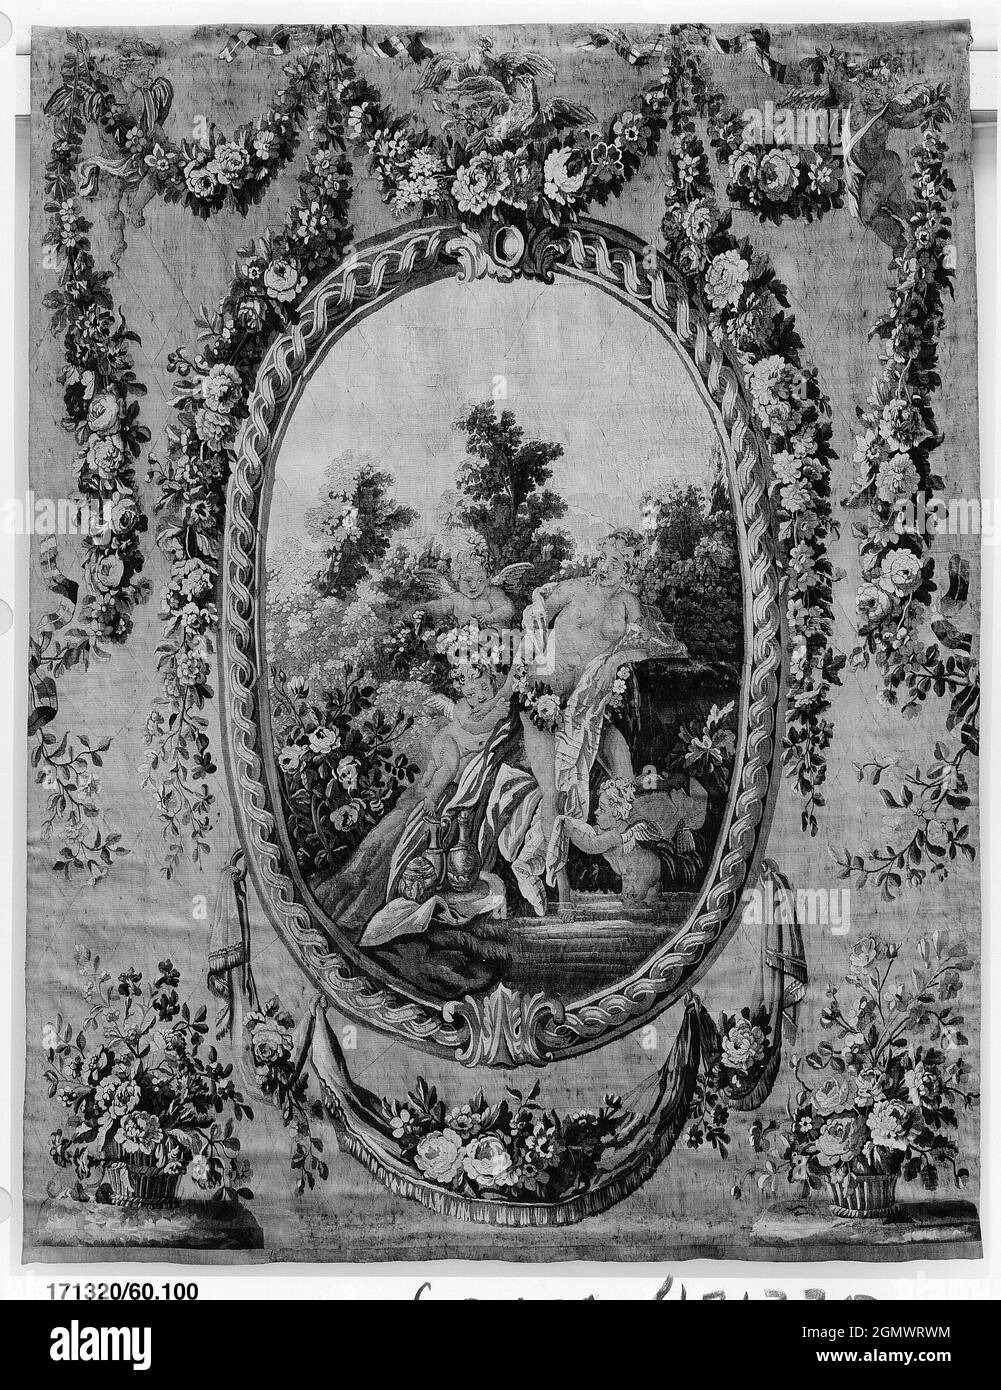 The Toilet of Venus. Manufactory: Aubusson (Manufacture Royale, est. 1665: Manufacture, ca. 1812-present day); Date: ca. 1770-80; Culture: French, Stock Photo